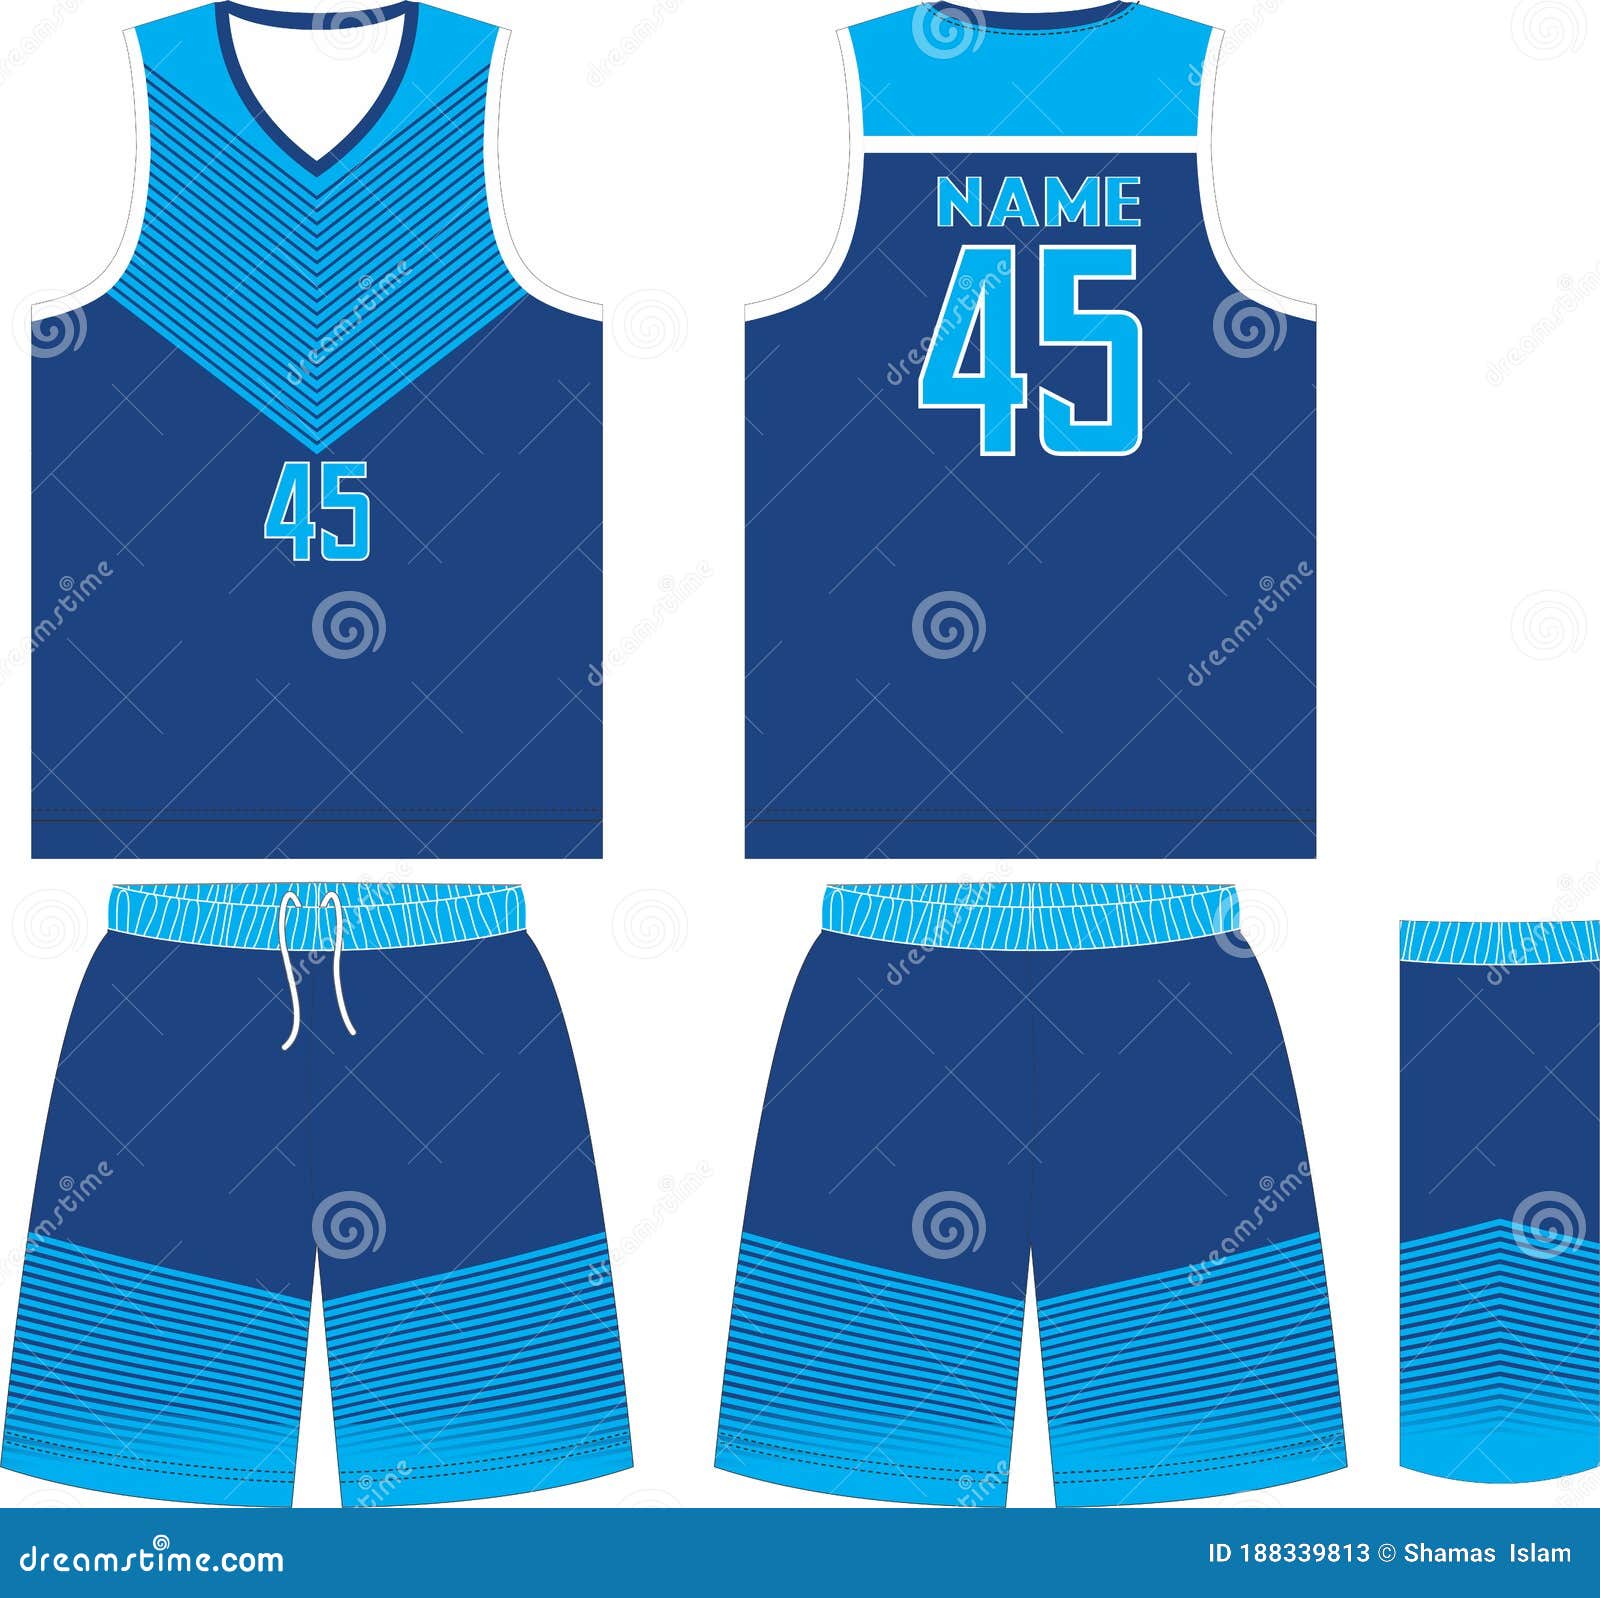 Download 49+ Basketball Jersey Mockup Back View Images Yellowimages - Free PSD Mockup Templates